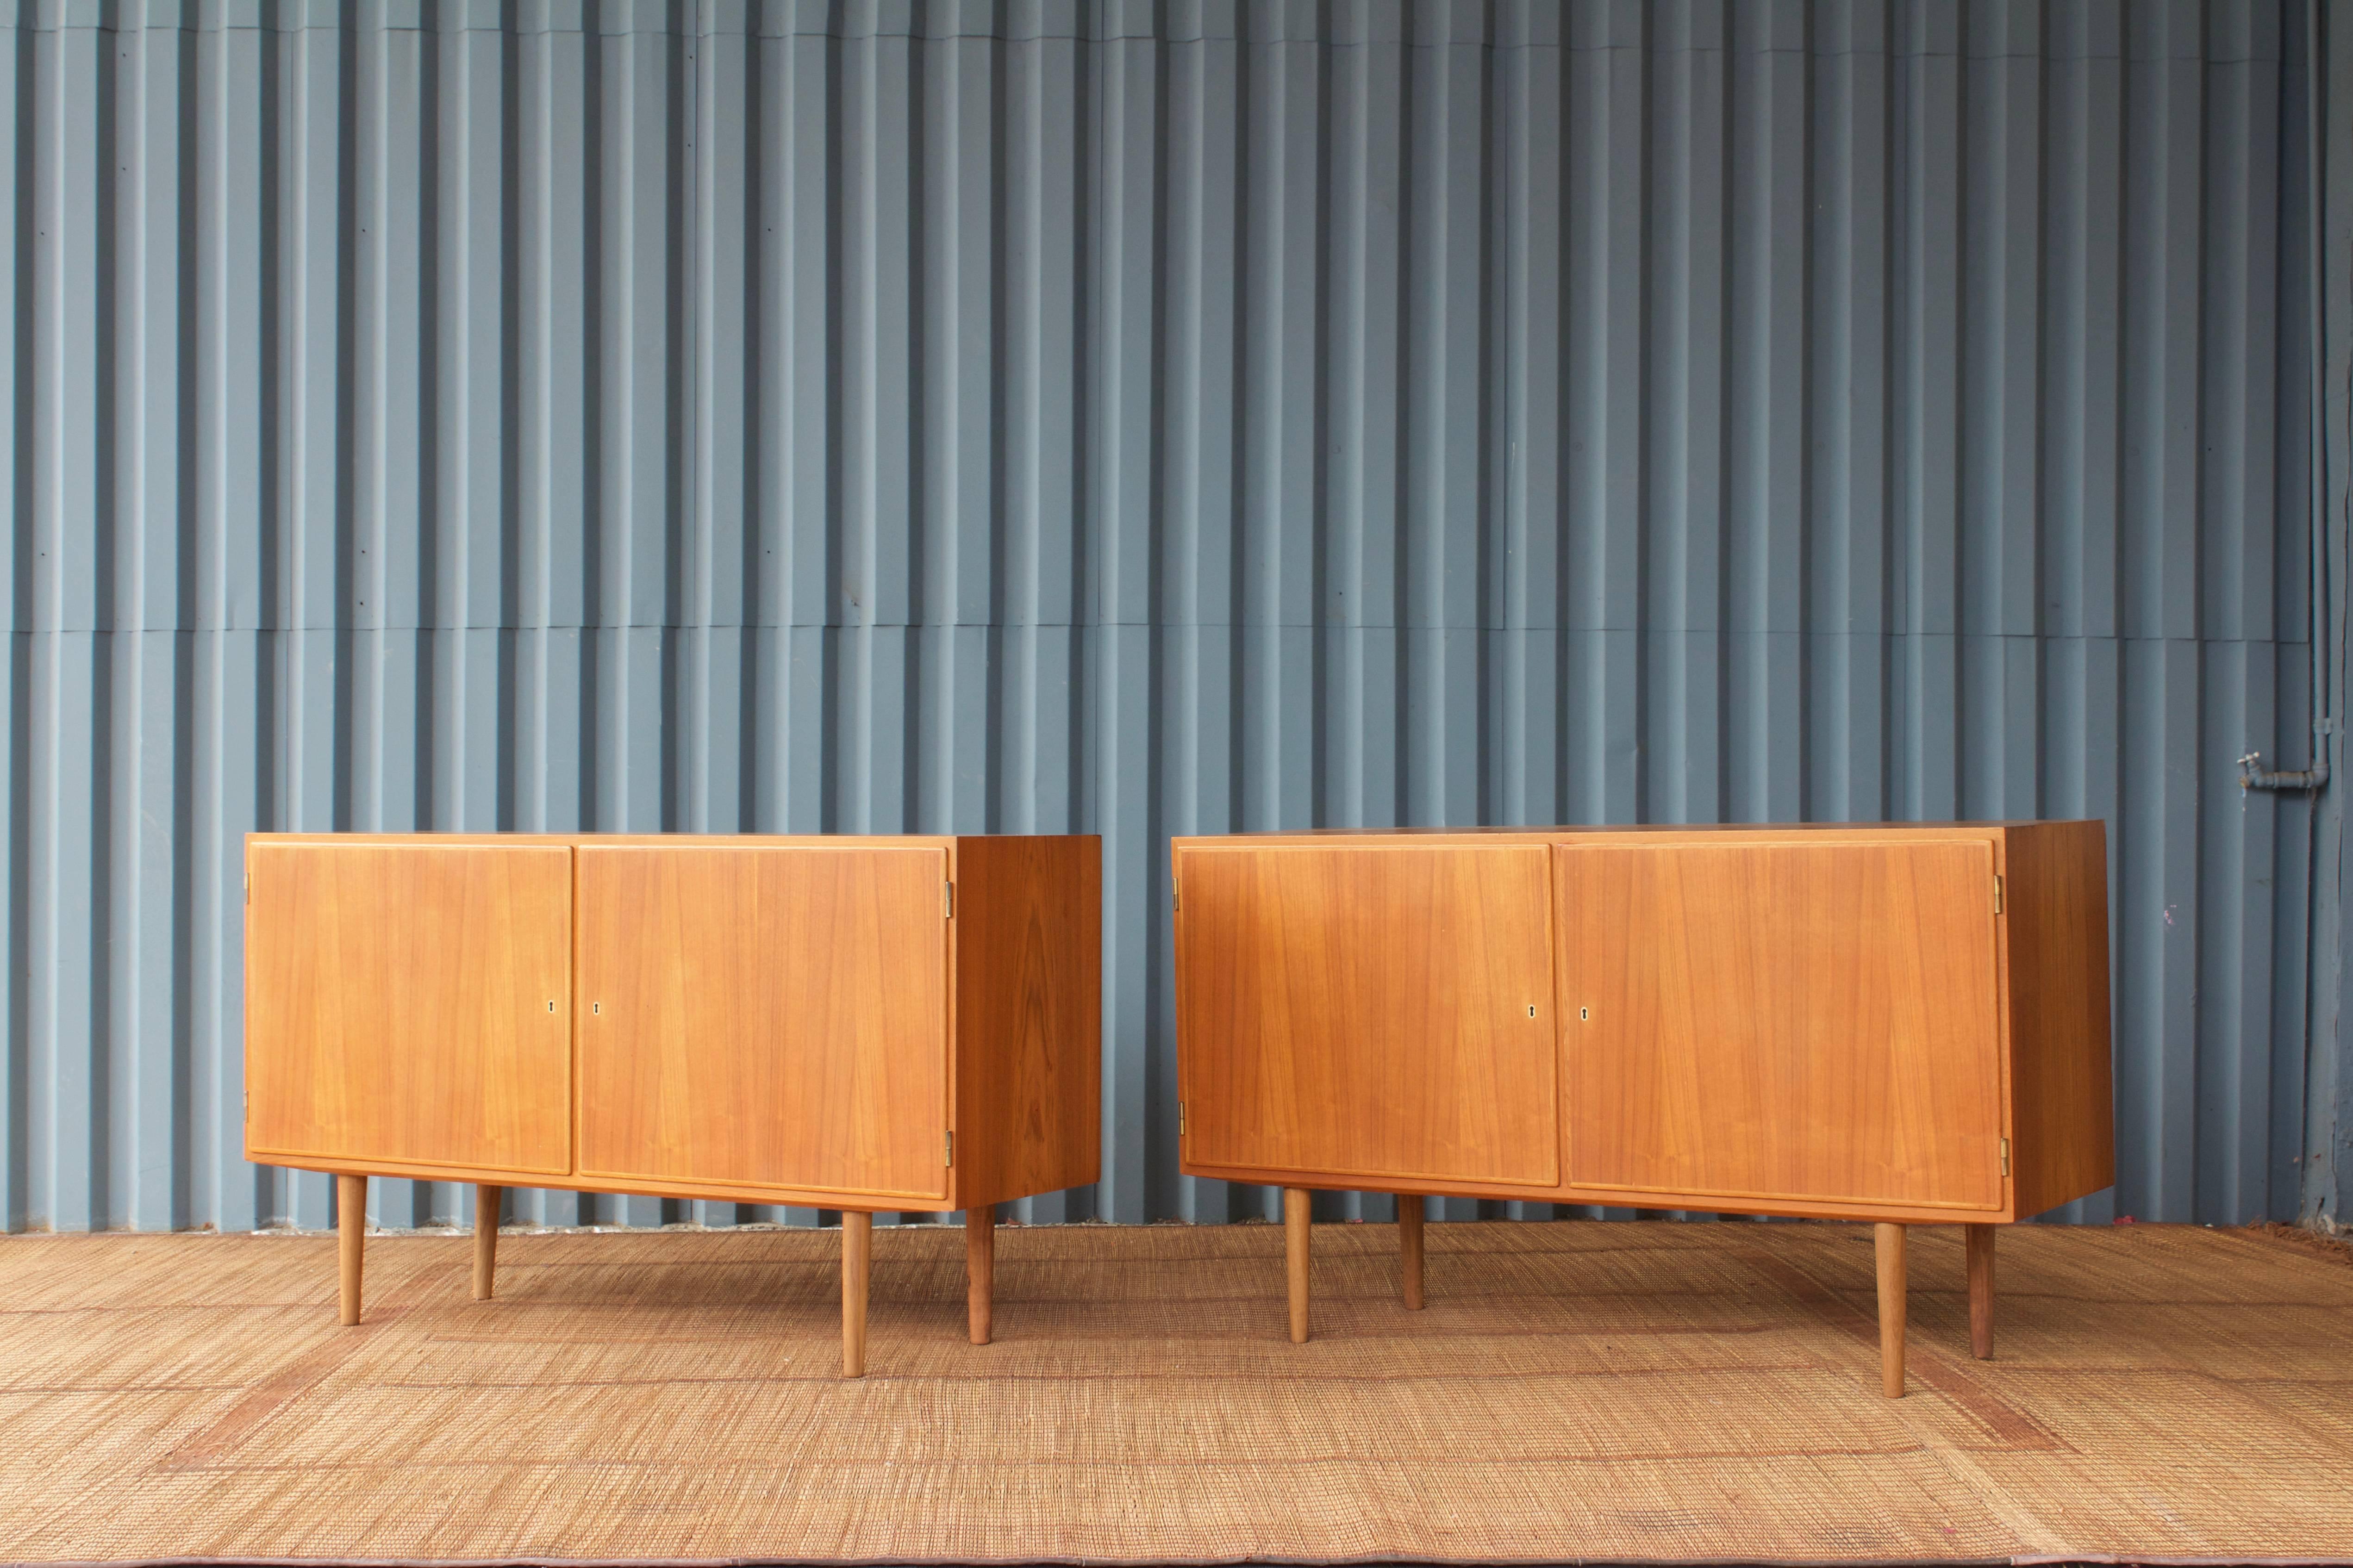 Great, mid-scale credenzas or cabinets from Denmark in the 1960s, made from teak wood. The pair has a Classic Mid-Century vibe and identical modular shelving in each piece. One key works for both cabinets.